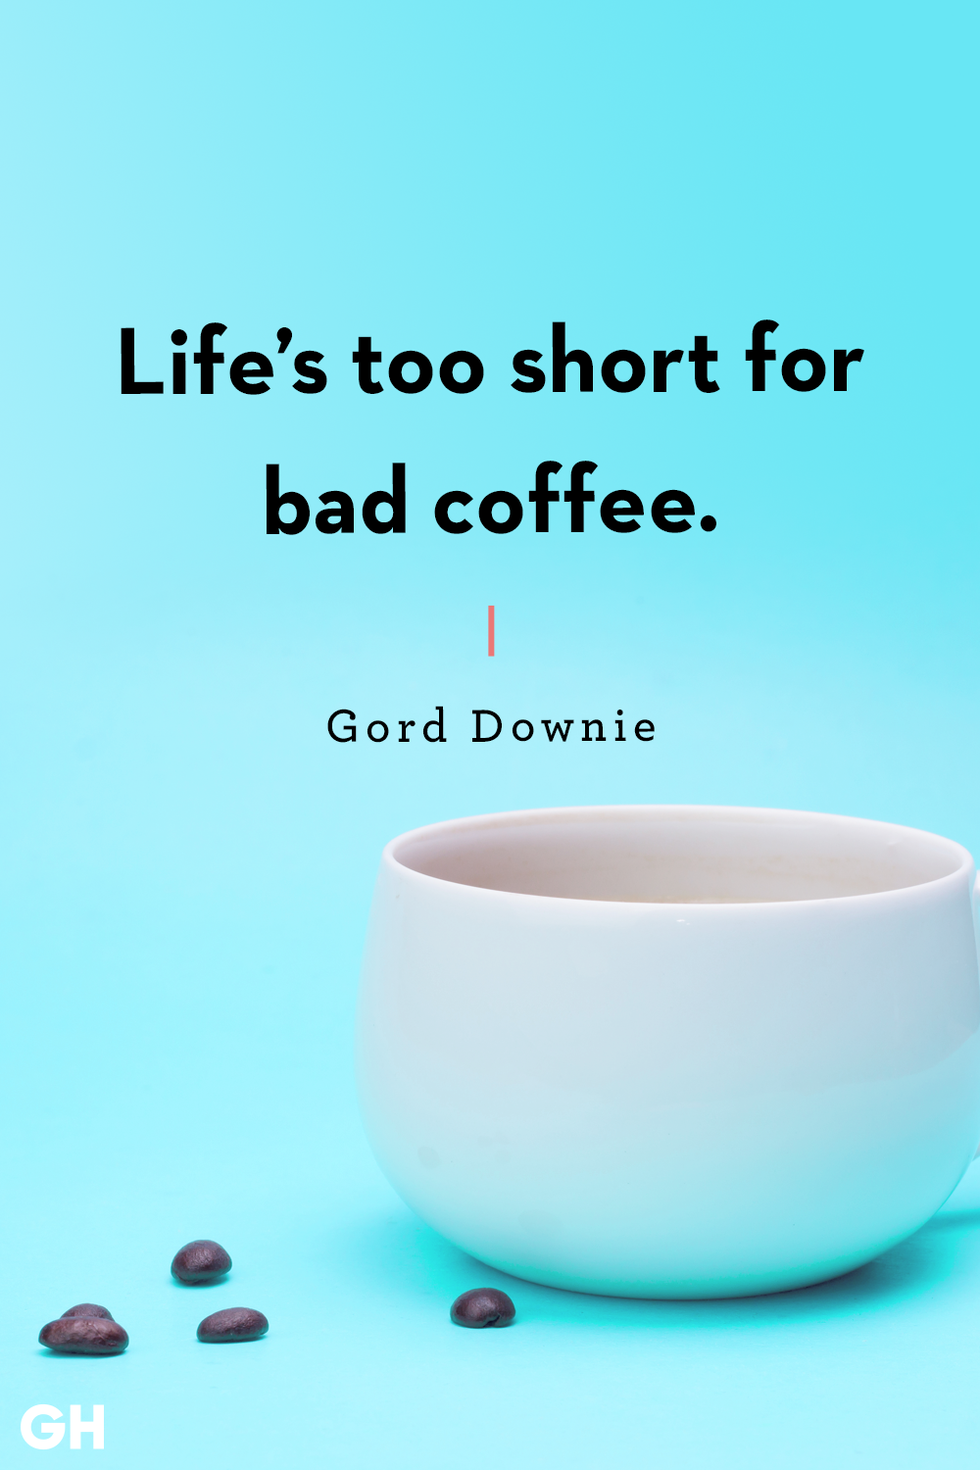 52 Best Funny Coffee Quotes And Sayings For Any Day Of The Week